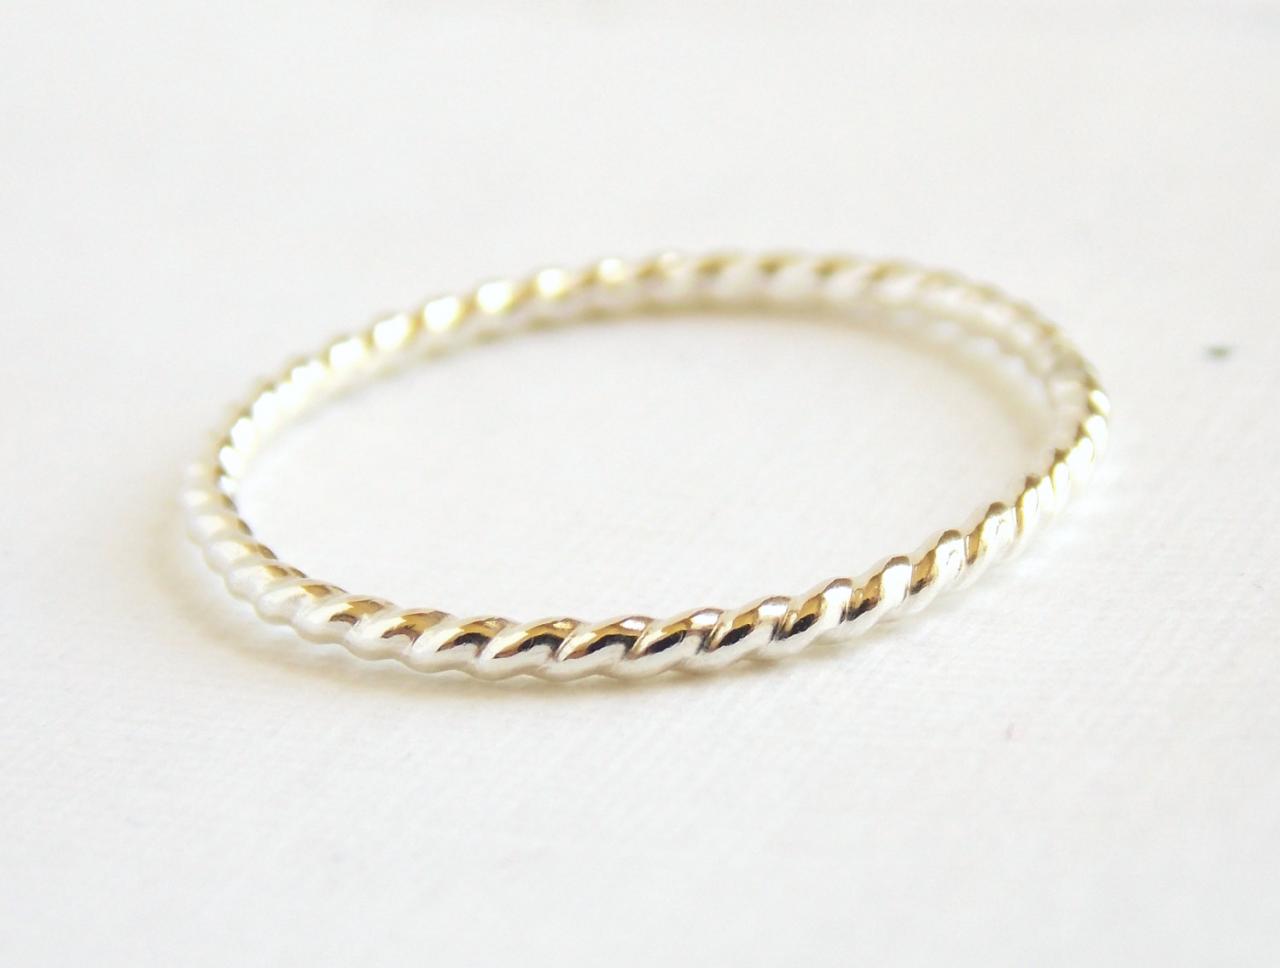 Sterling Silver Twist Ring - Sterling Silver Ring, Dainty Ring, Simple Ring, Stacking Ring, Skinny Ring, Silver Ring, Small Ring